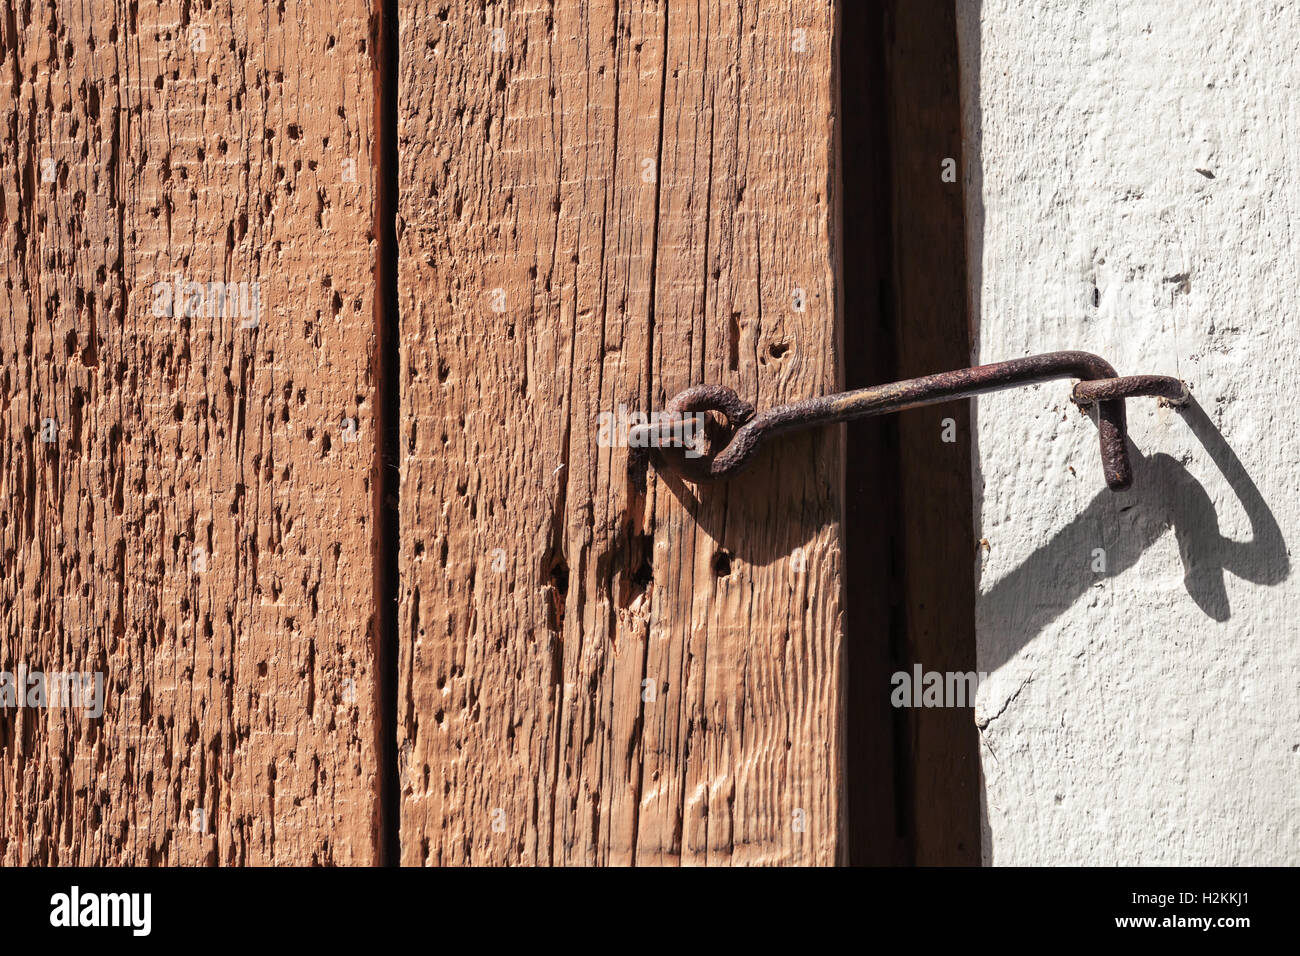 Old rusted latch hook on rough wooden door Stock Photo